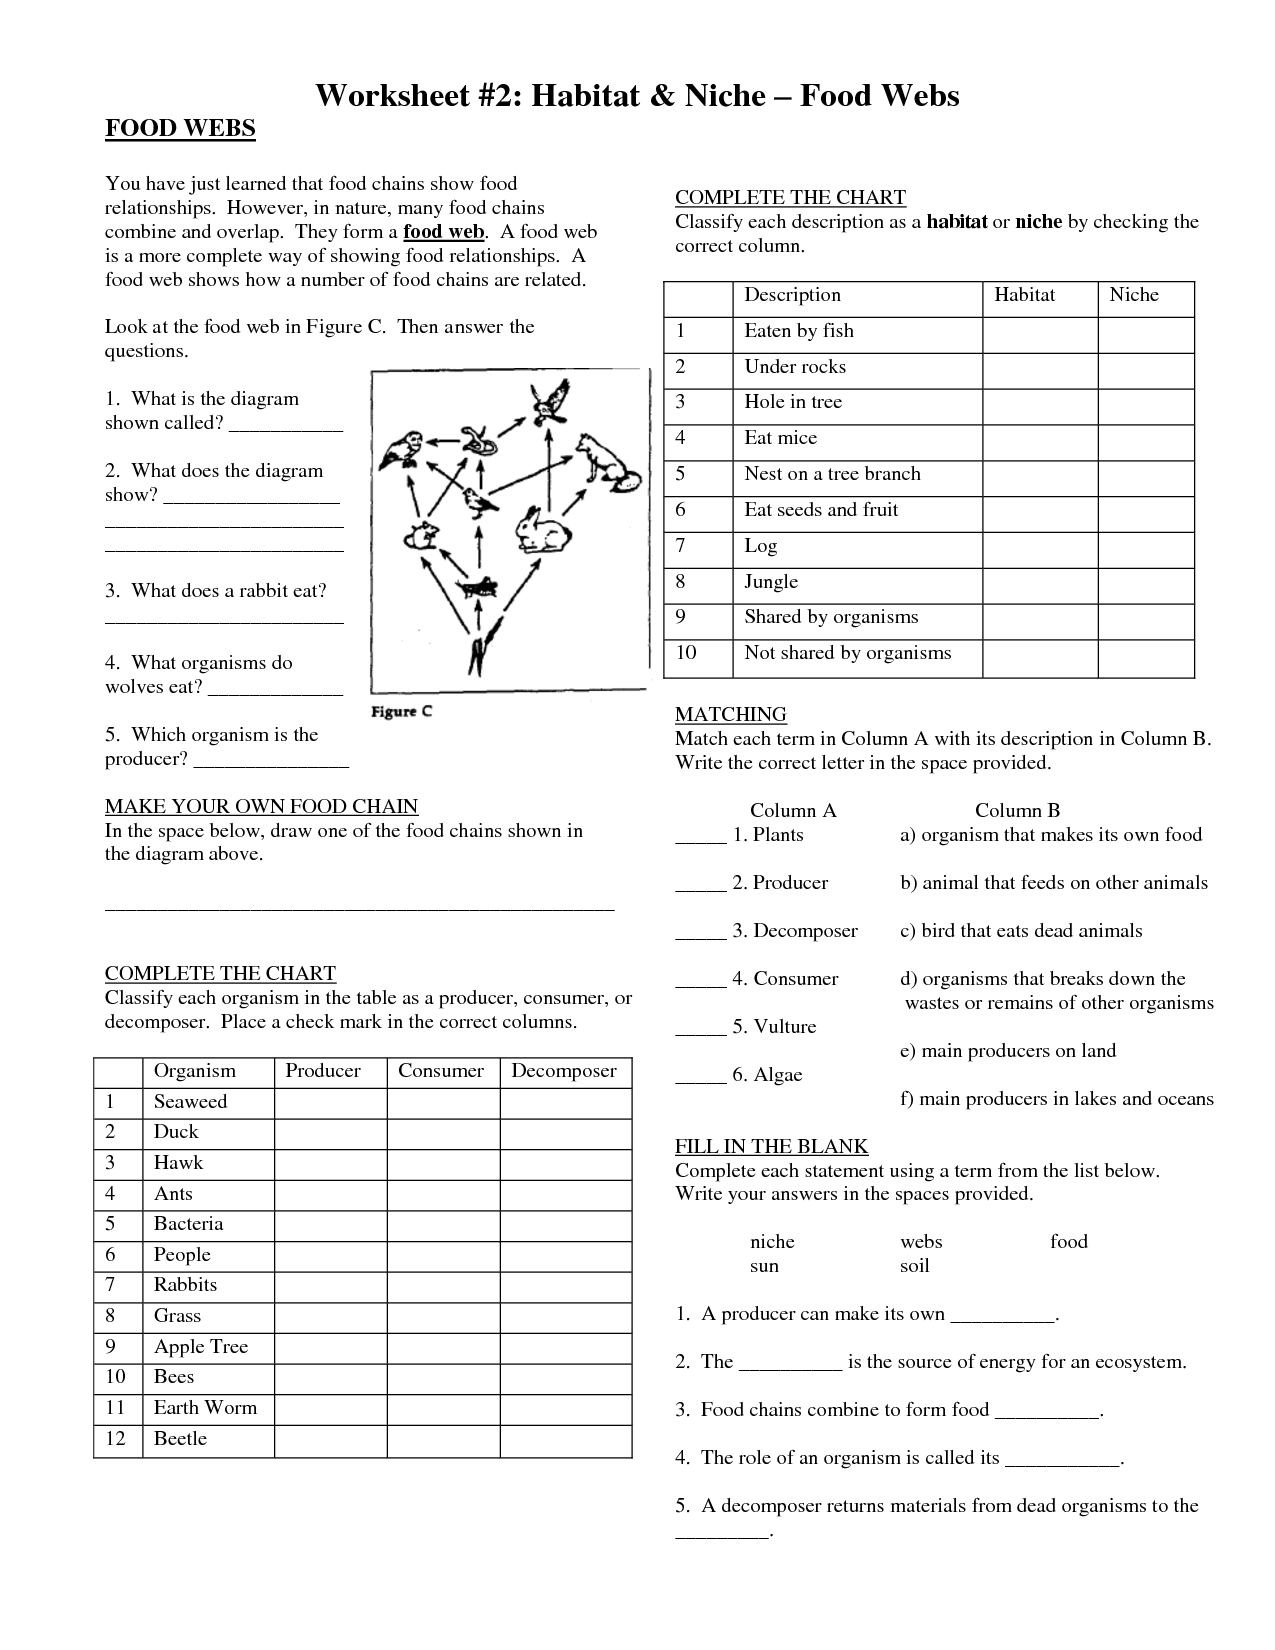 Food Chains and Web's Worksheets